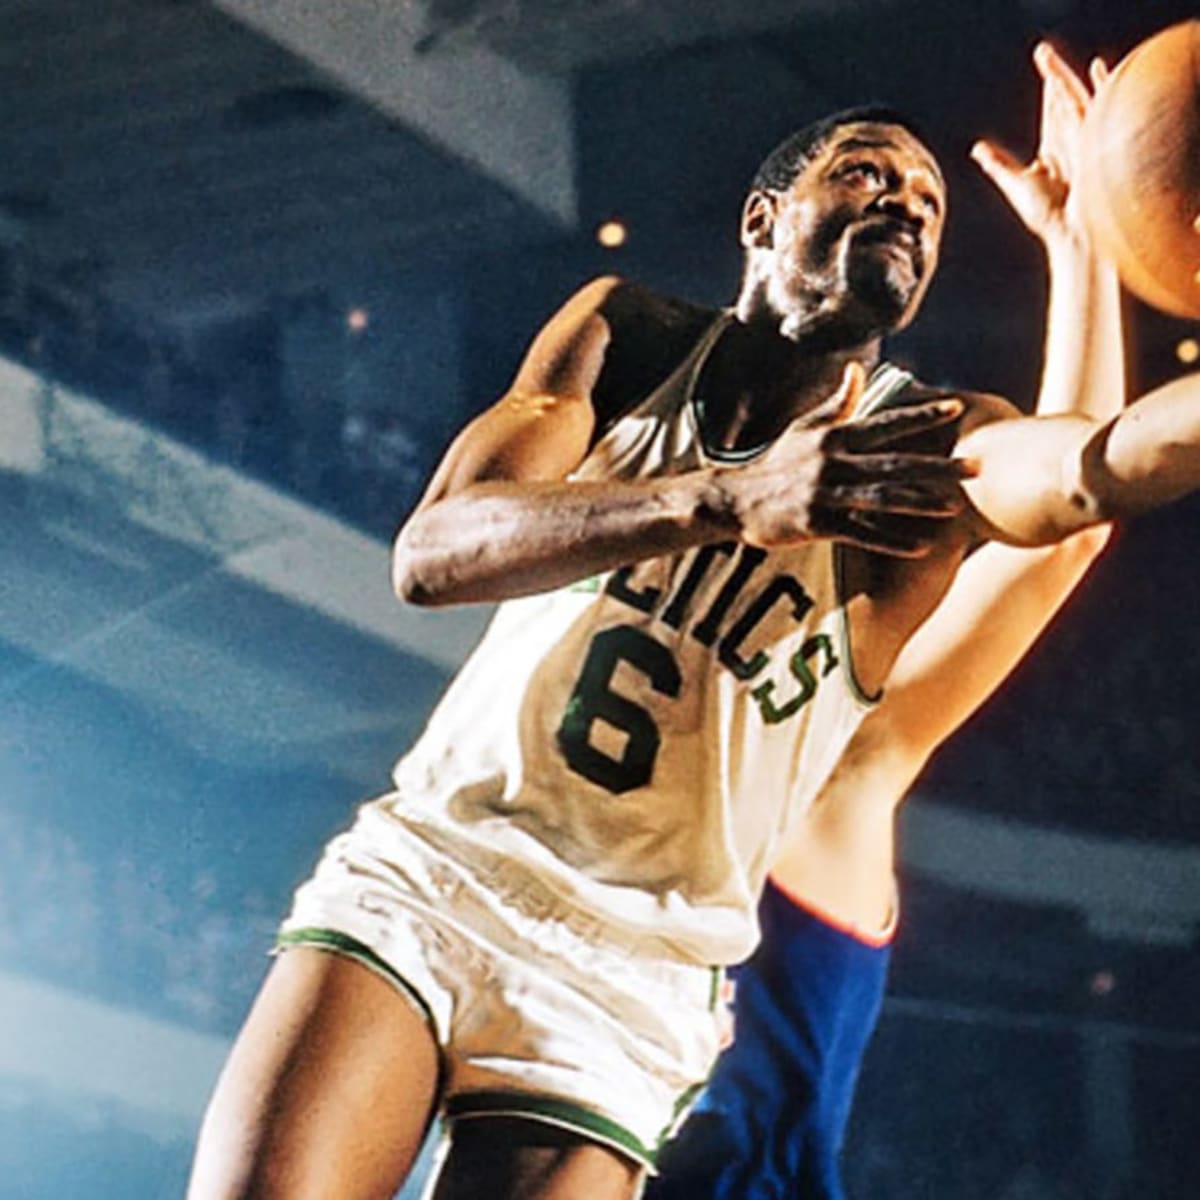 Bill Russell wears Kobe Bryant jersey to Celtics-Lakers game